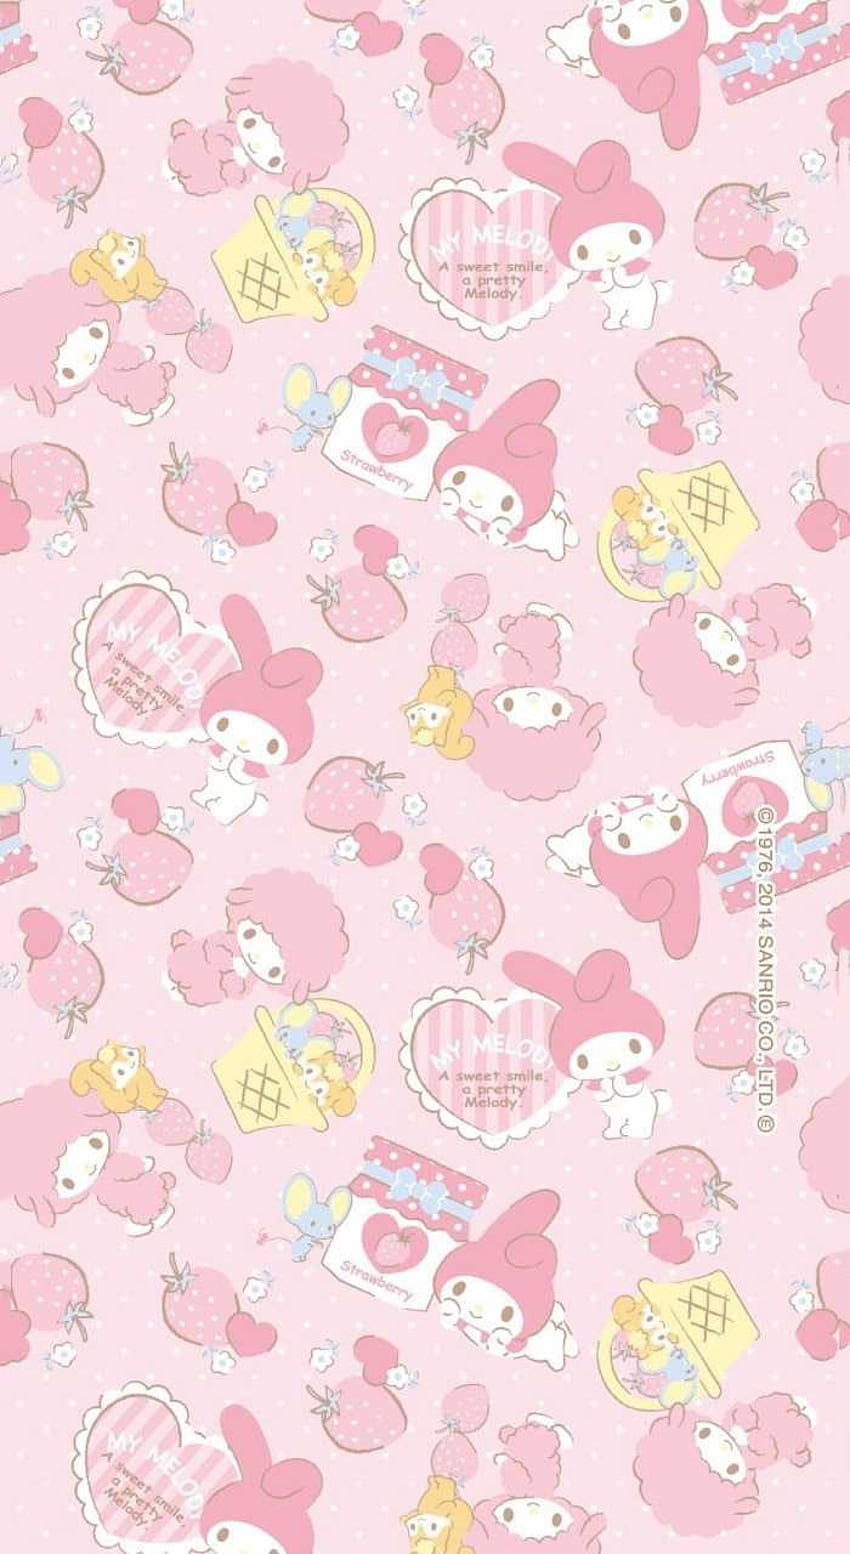 My Melody Phone - Awesome, Onegai My Melody HD phone wallpaper